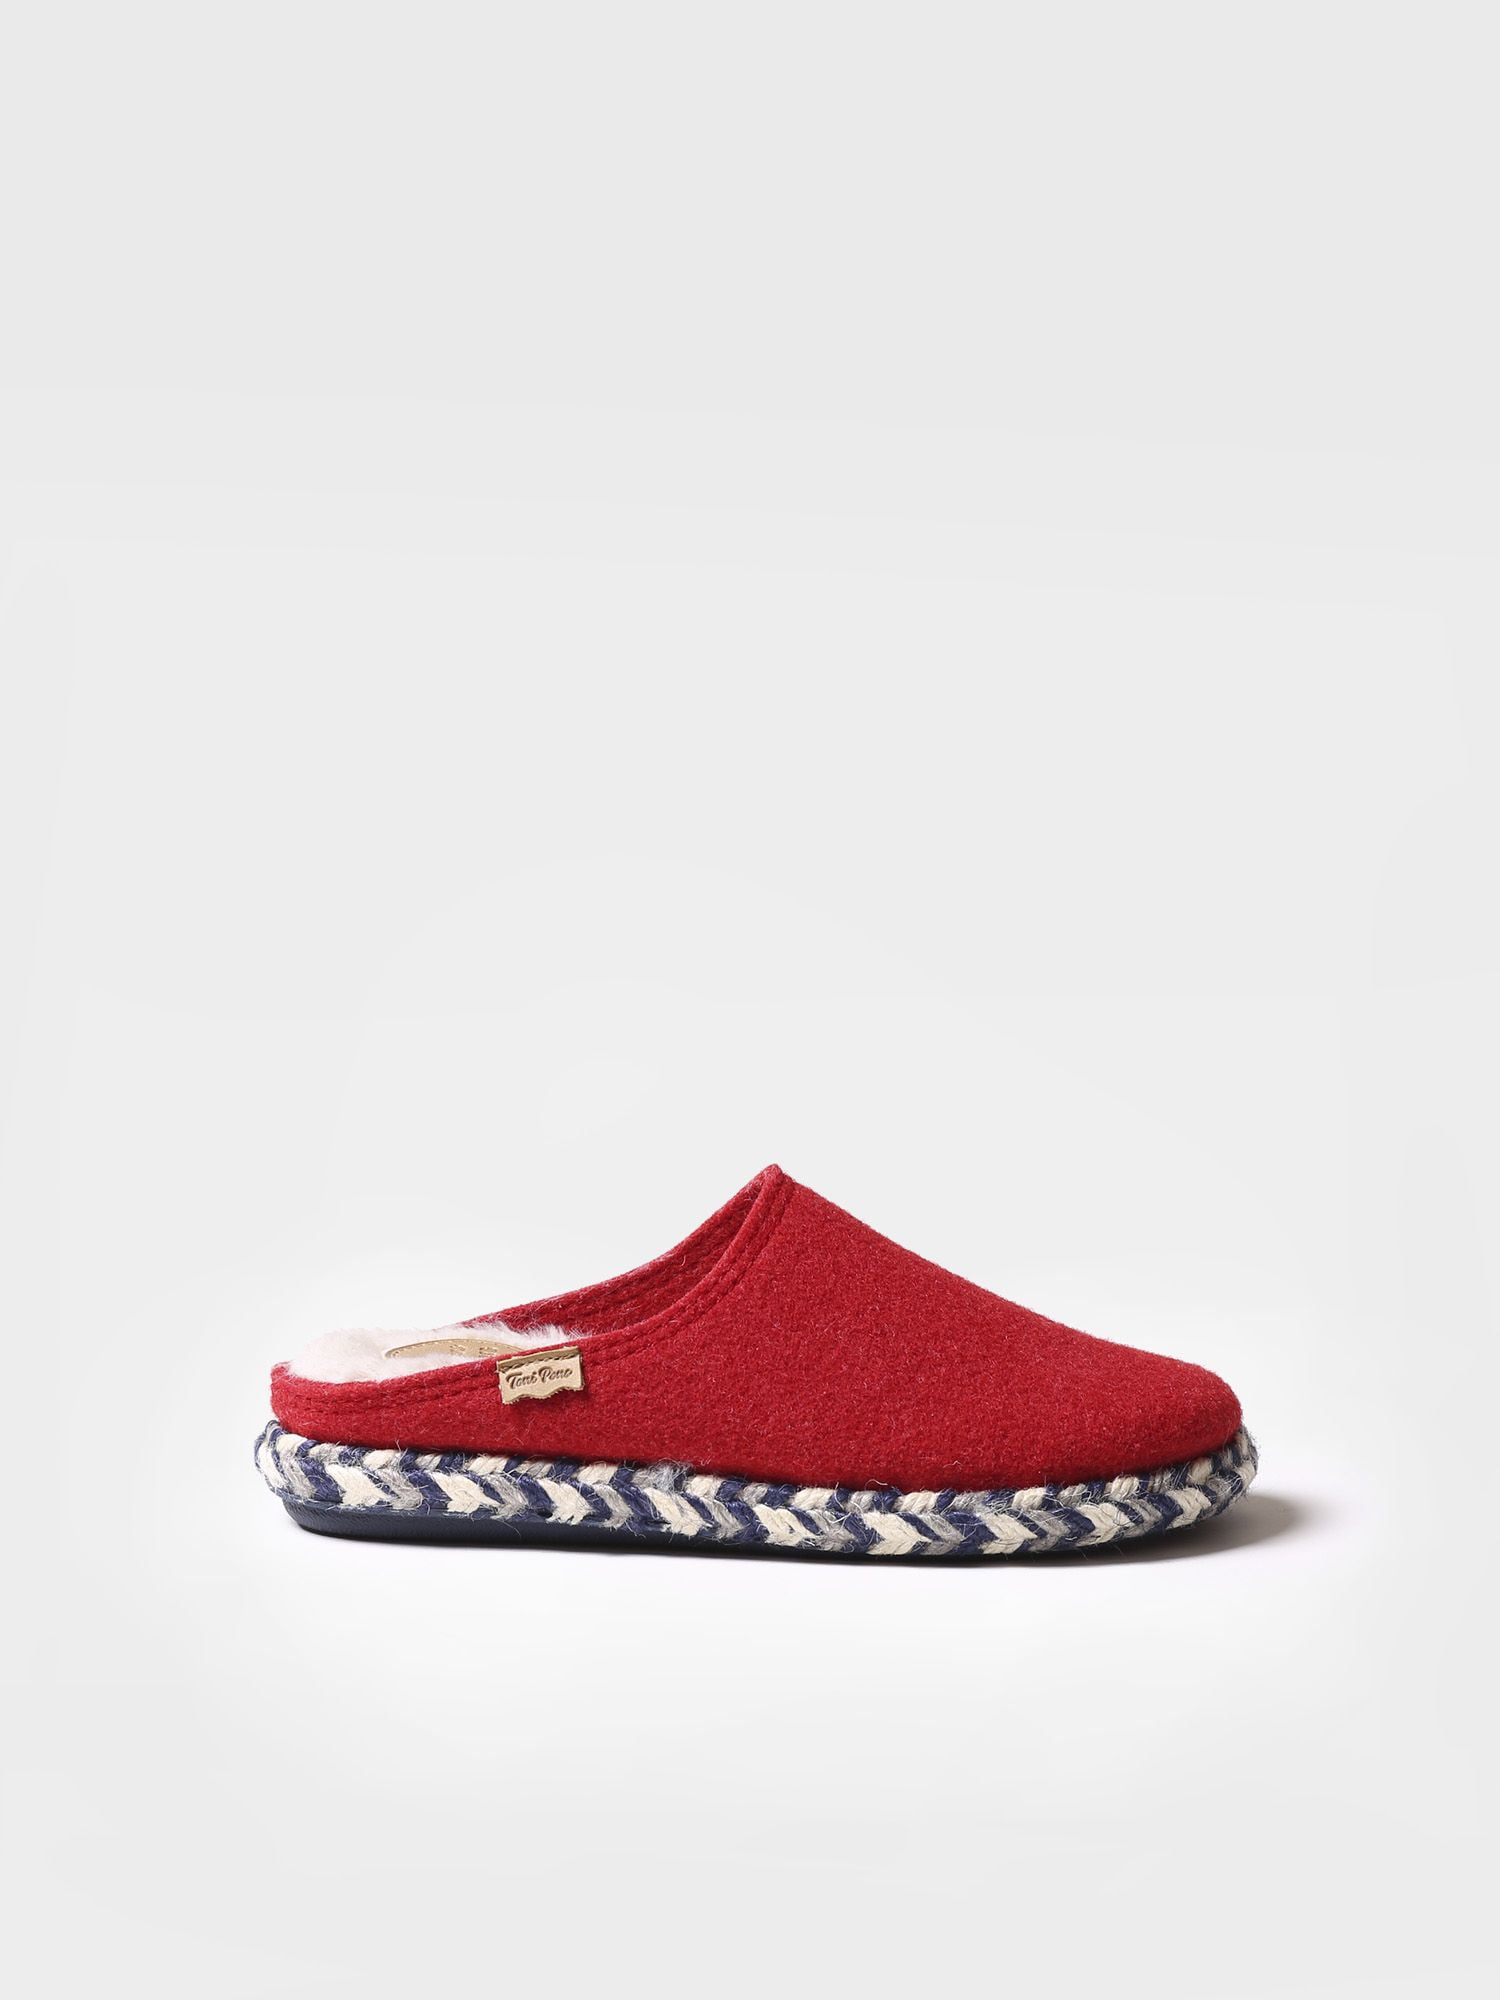 toni pons red slippers-fp_vermell__1.61